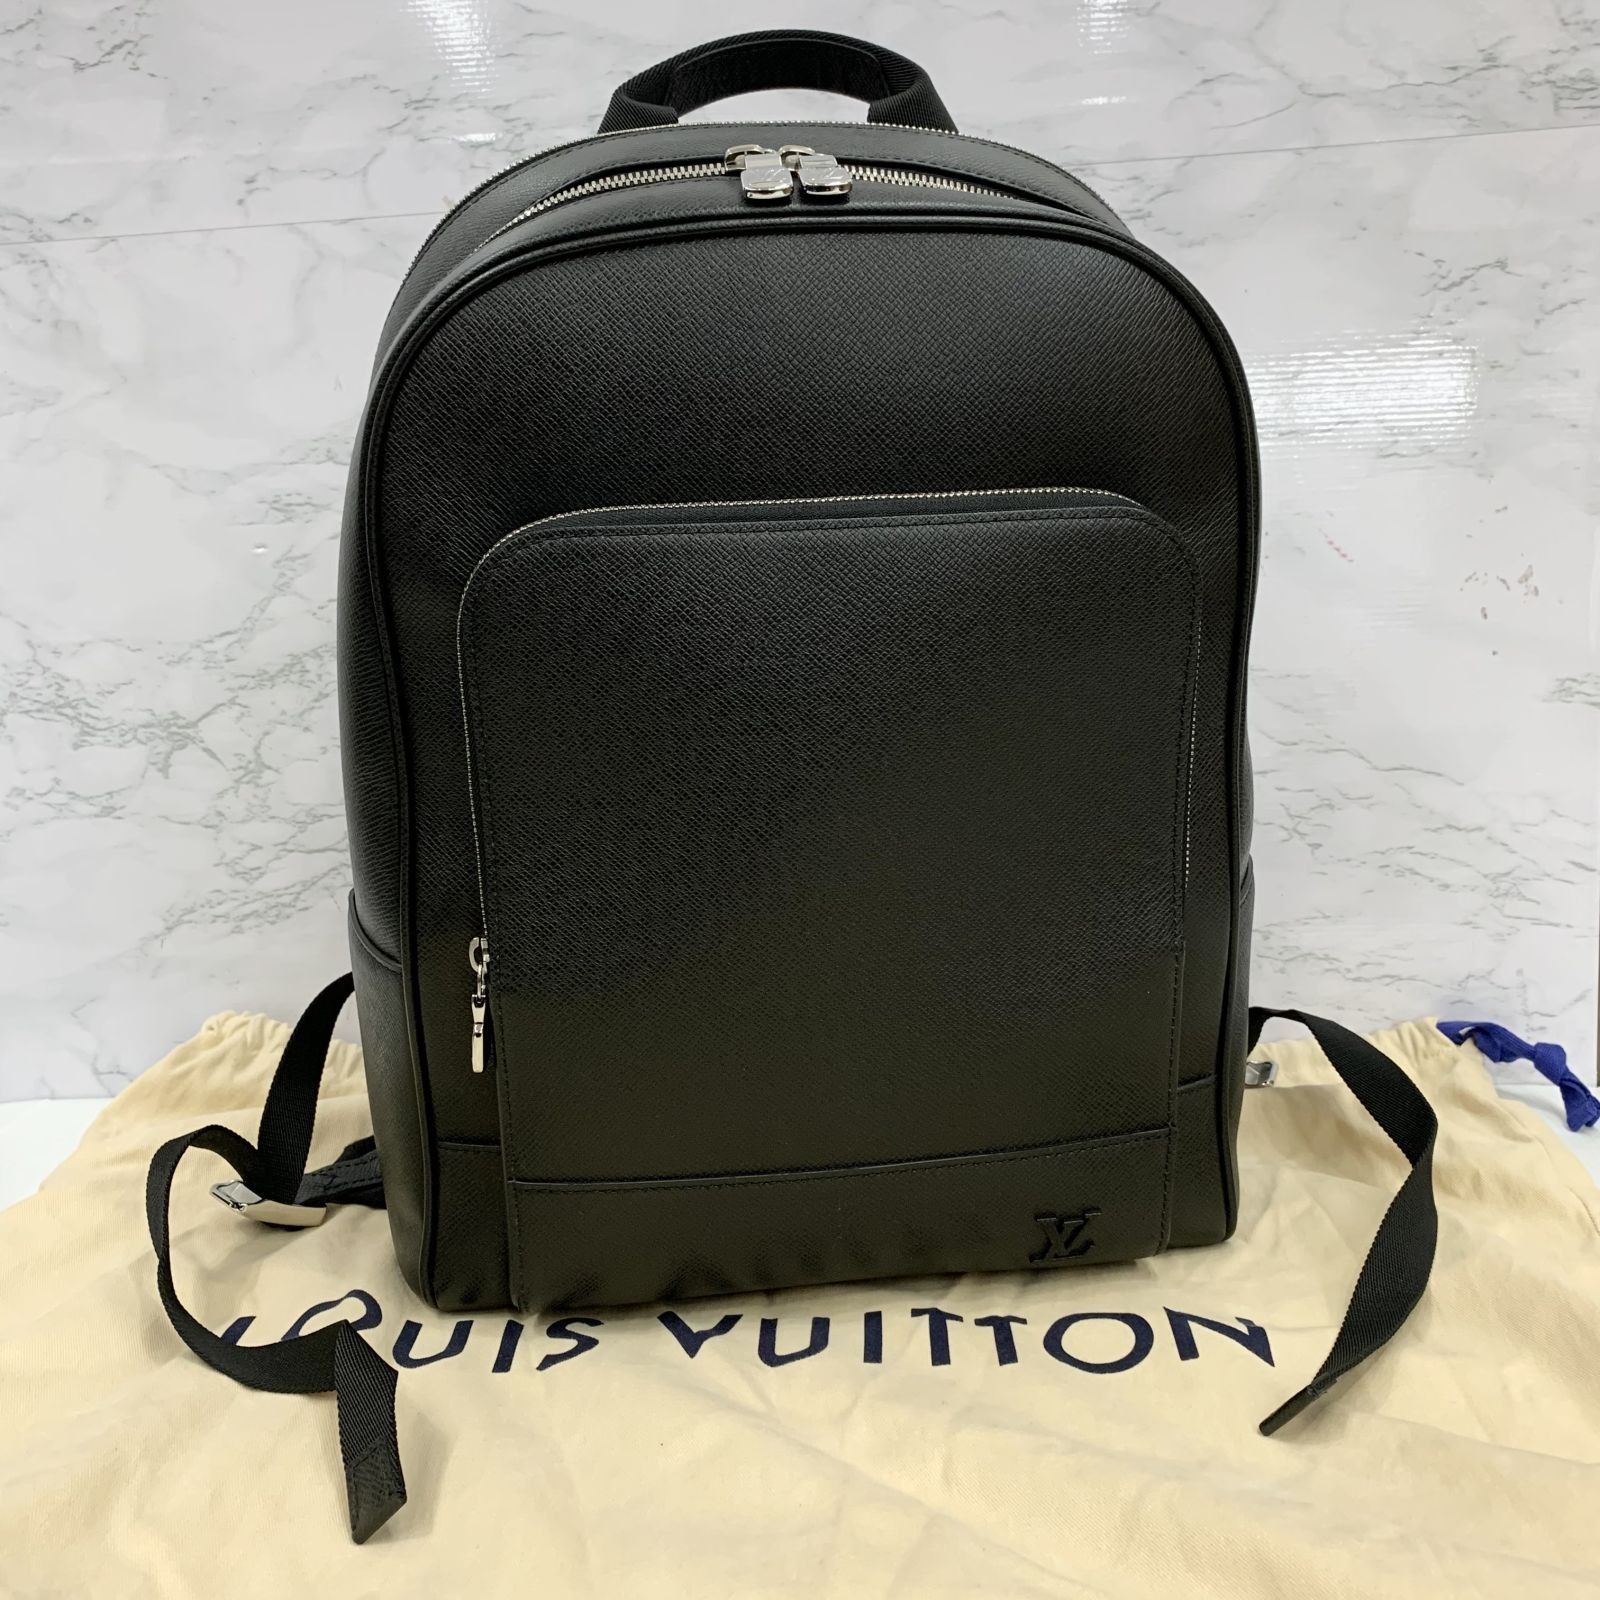 Shop Louis Vuitton Unisex Street Style Plain Leather Bridal Logo Backpacks  (ADRIAN BACKPACK, M30857) by Mikrie